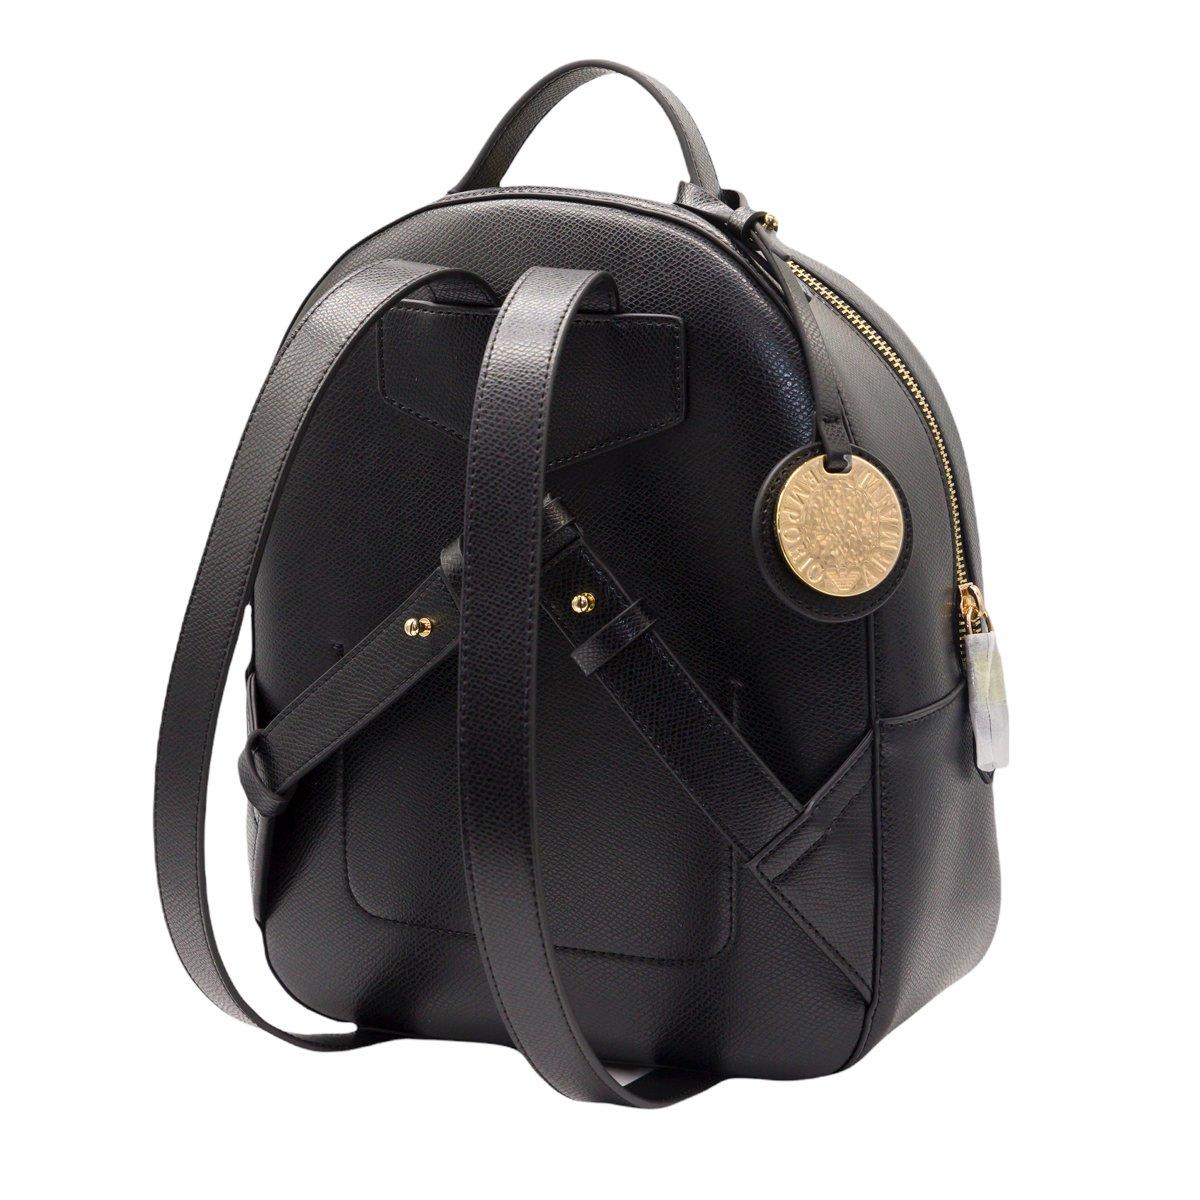 Shop Emporio Armani Charm-detailed Zipped Backpack In Black